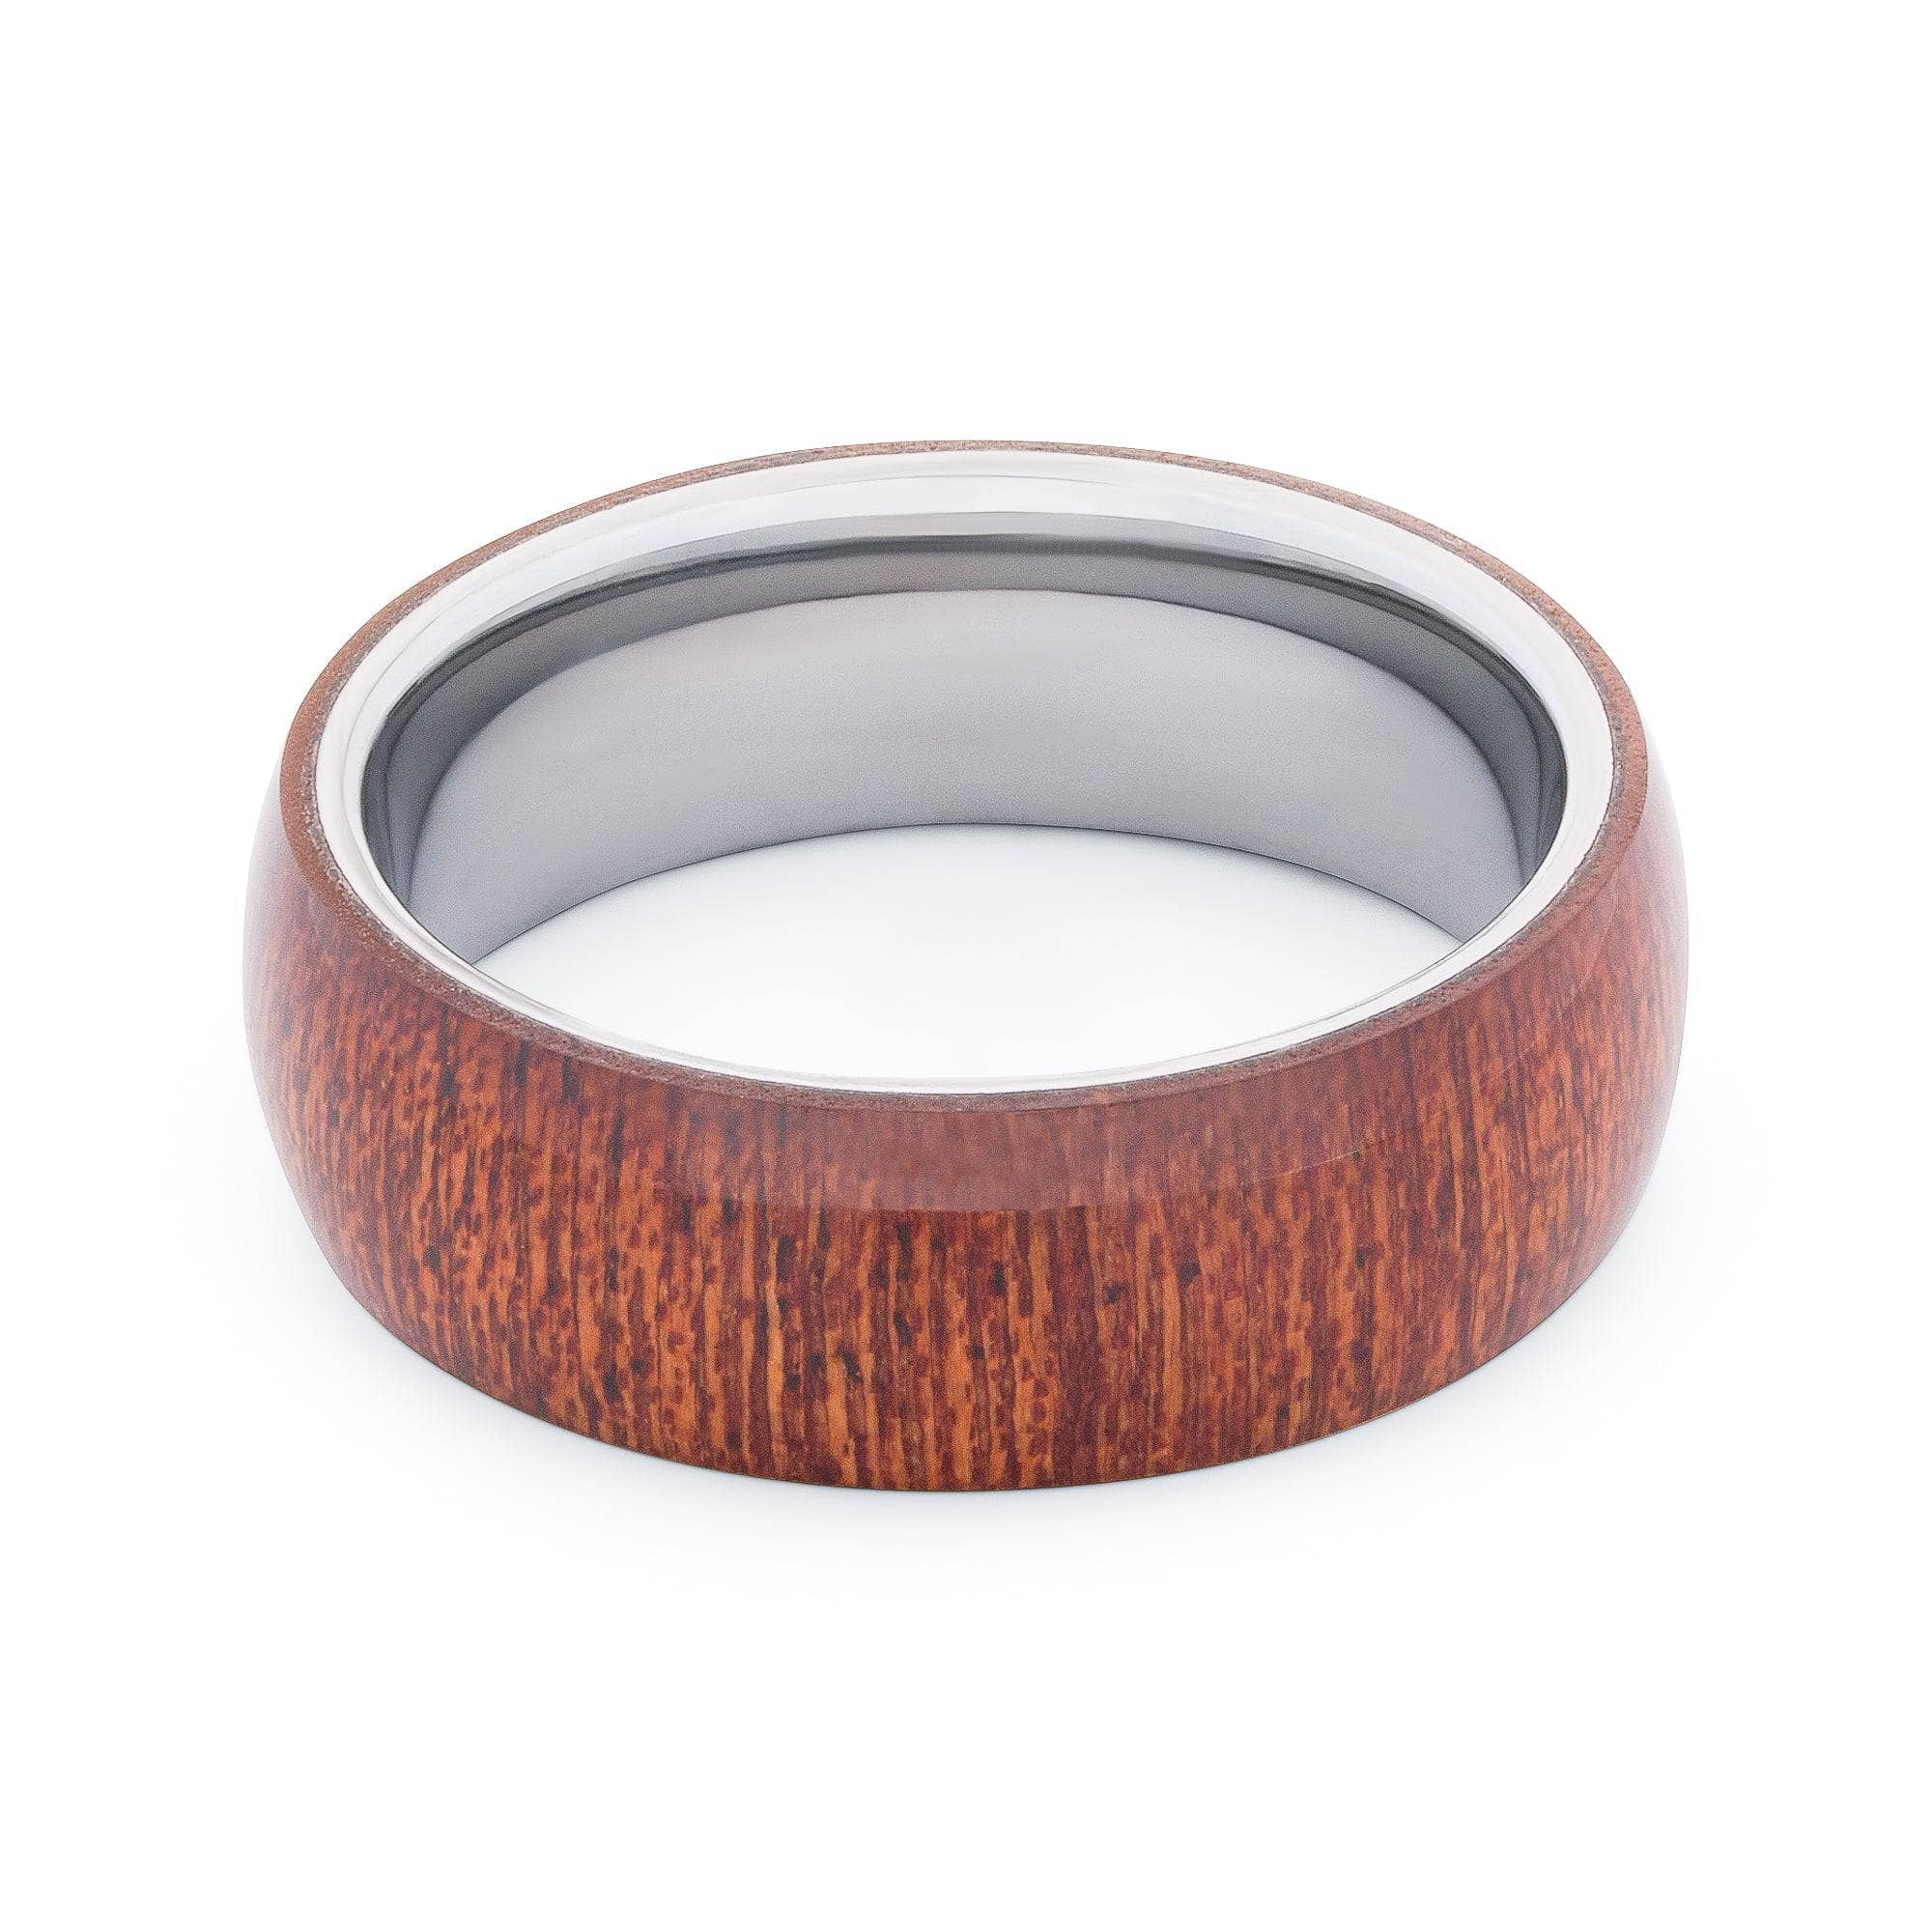 Polished Tungsten Wedding Band With Domed Dark Pear Wood Exterior